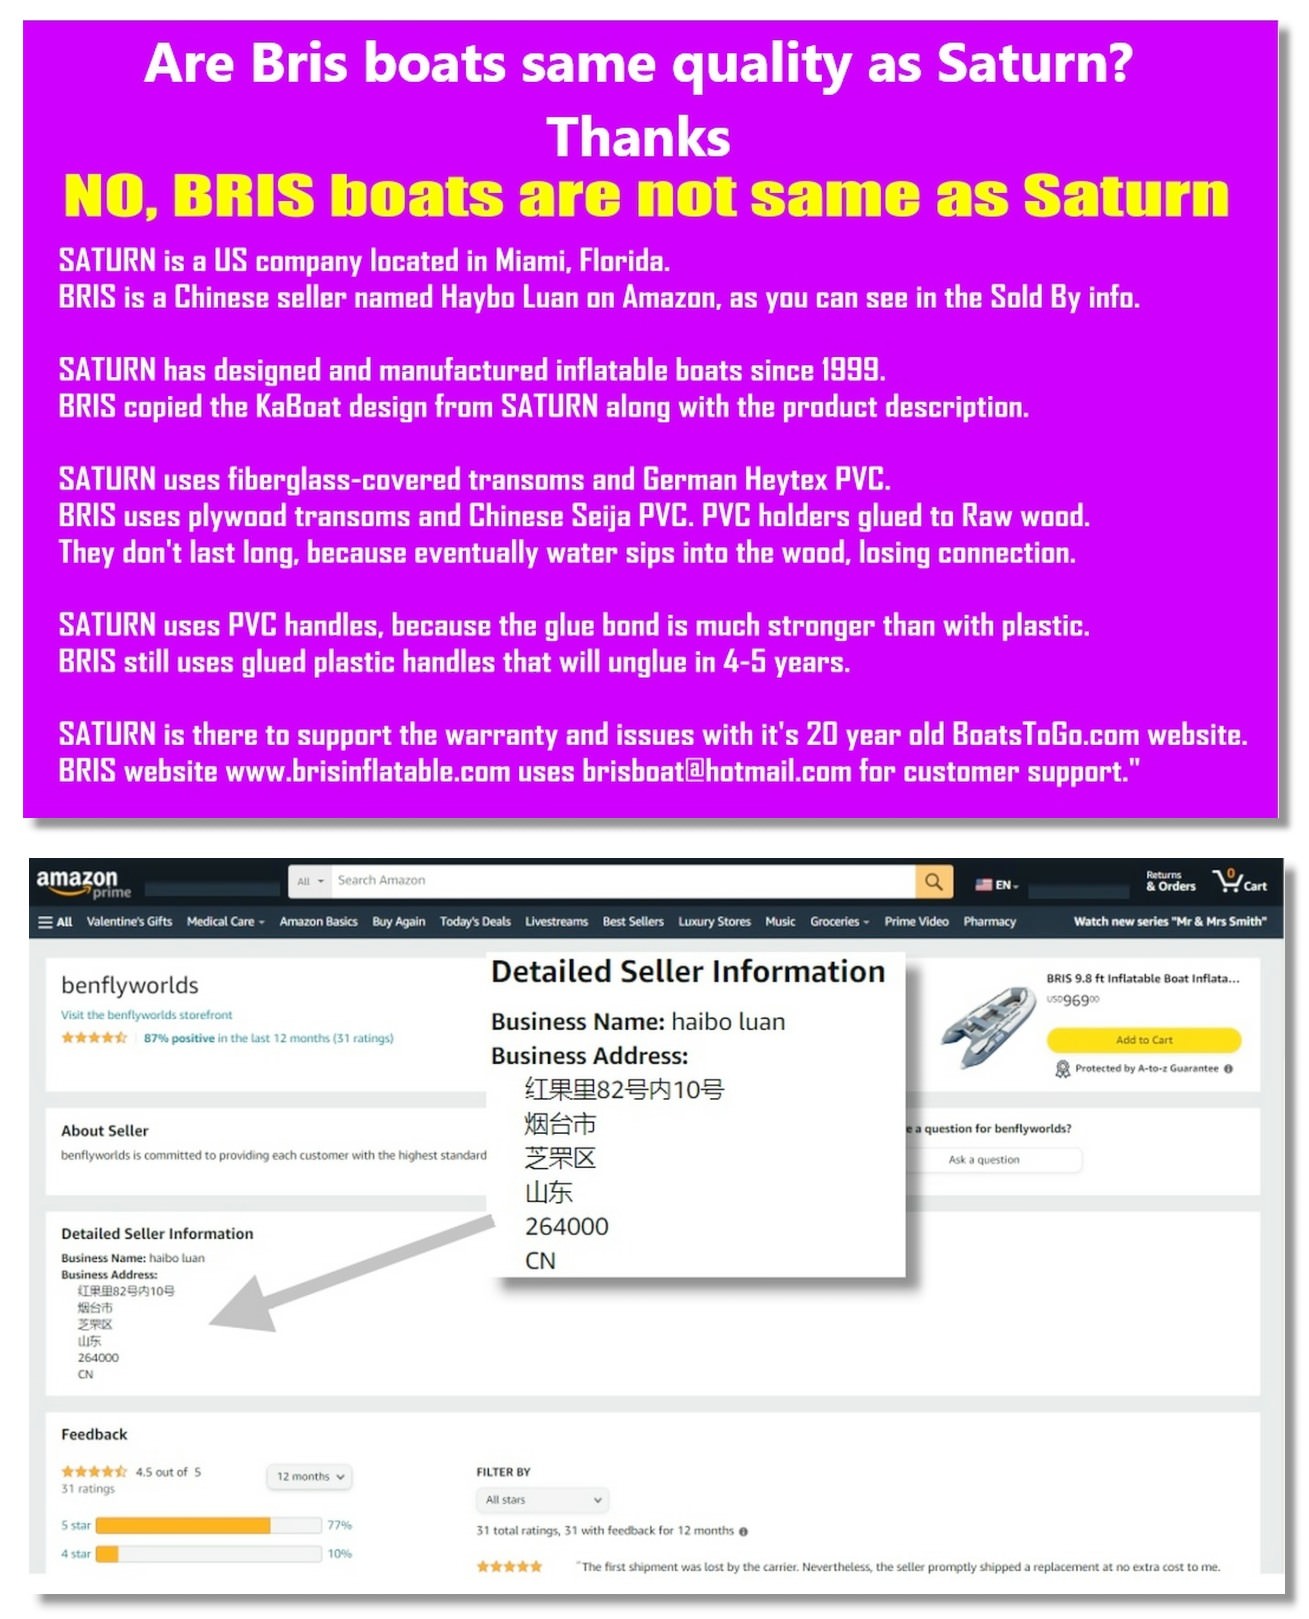 Are Bris Boats same quality as Saturn?